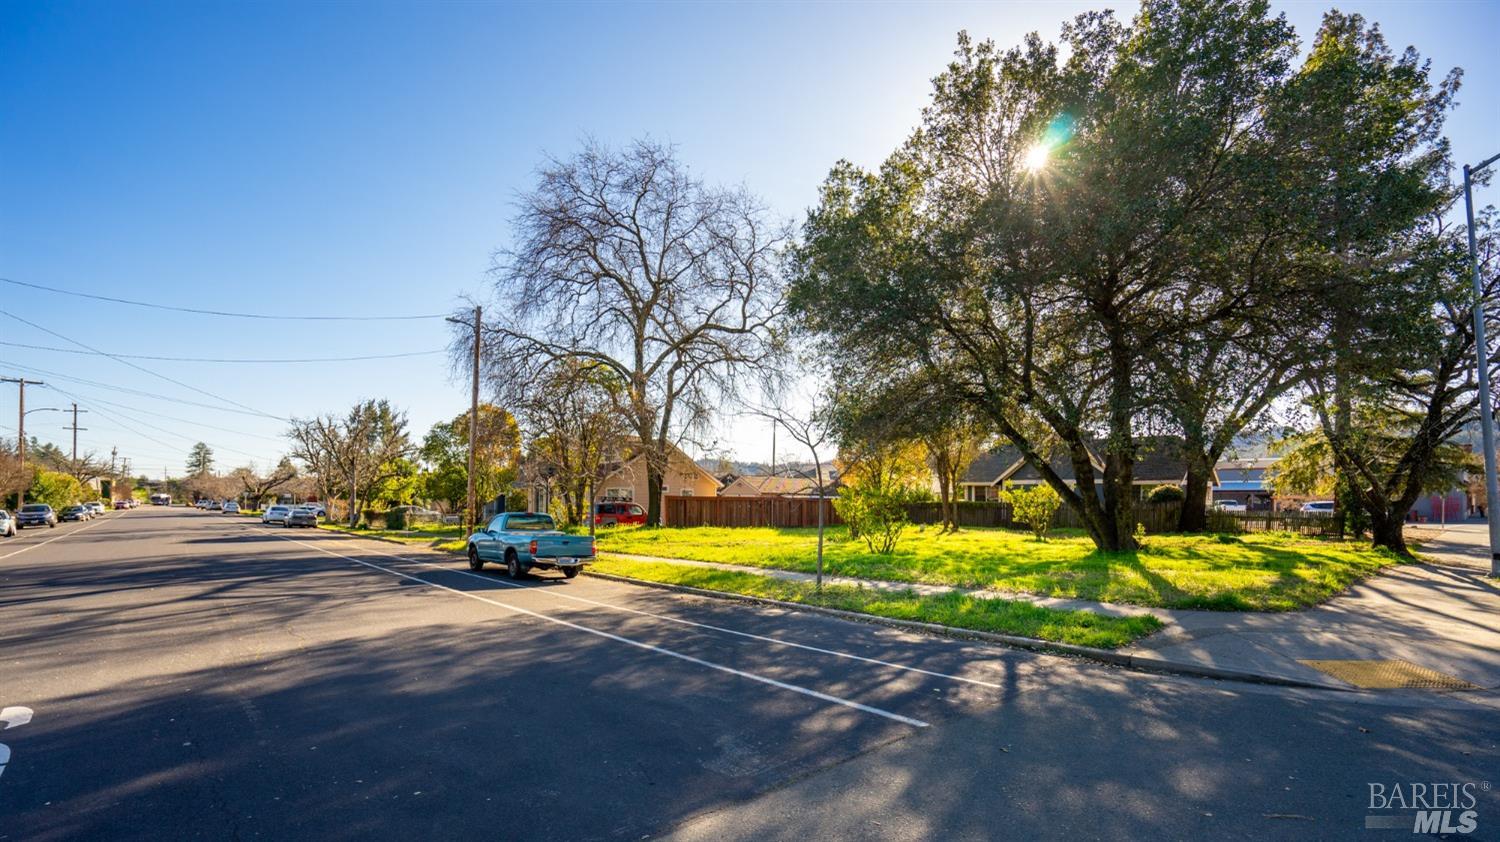 Photo of 209 1st St in Cloverdale, CA